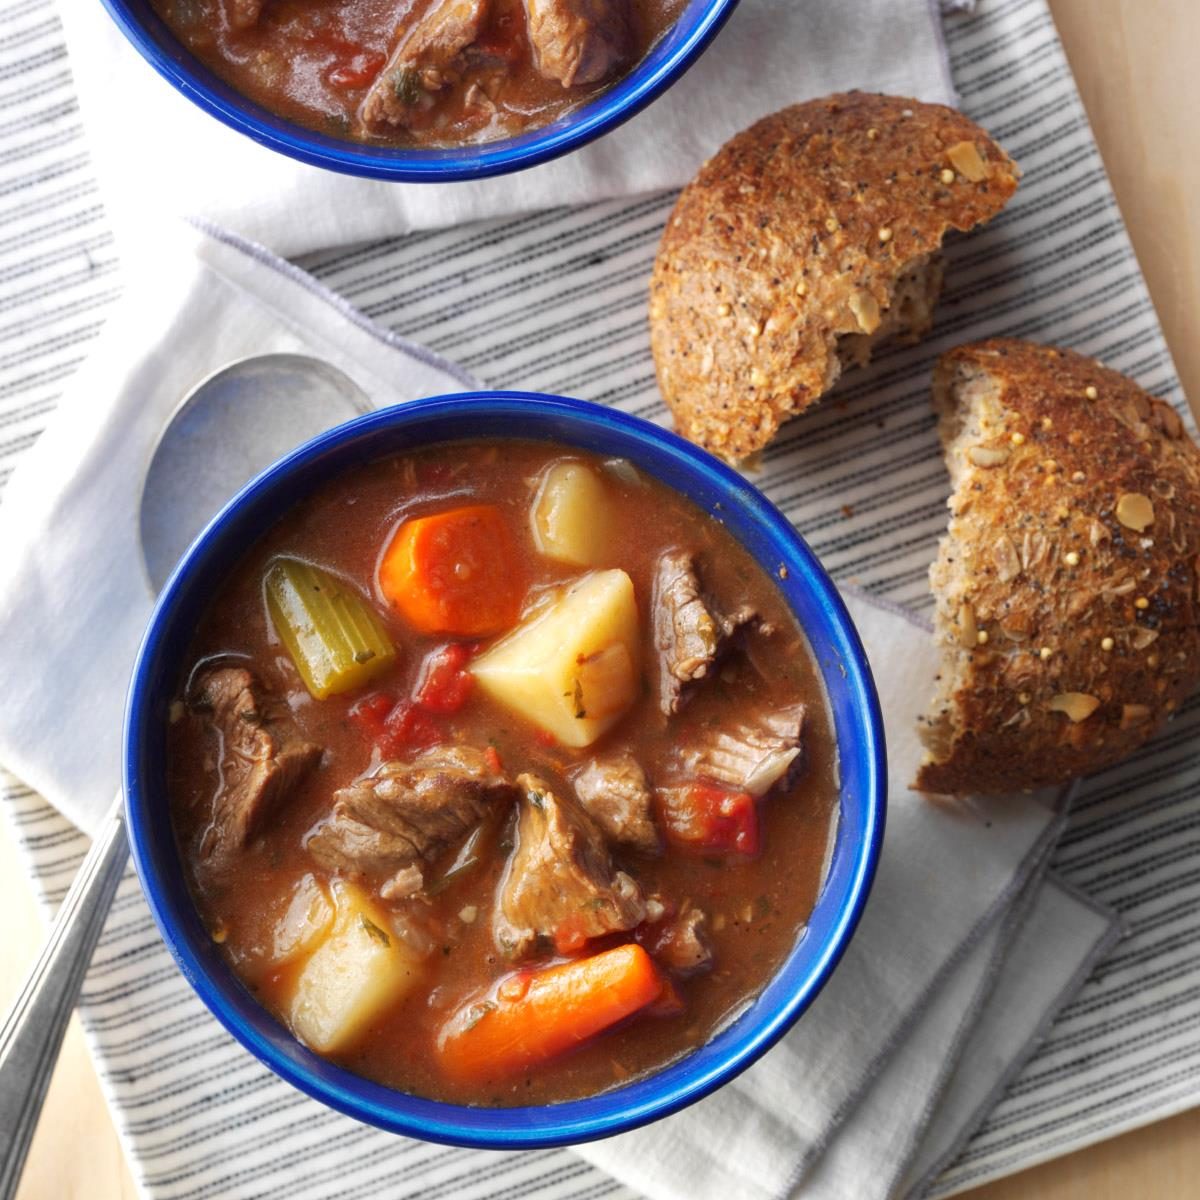 Classic Beef Stew Recipe: How to Make It